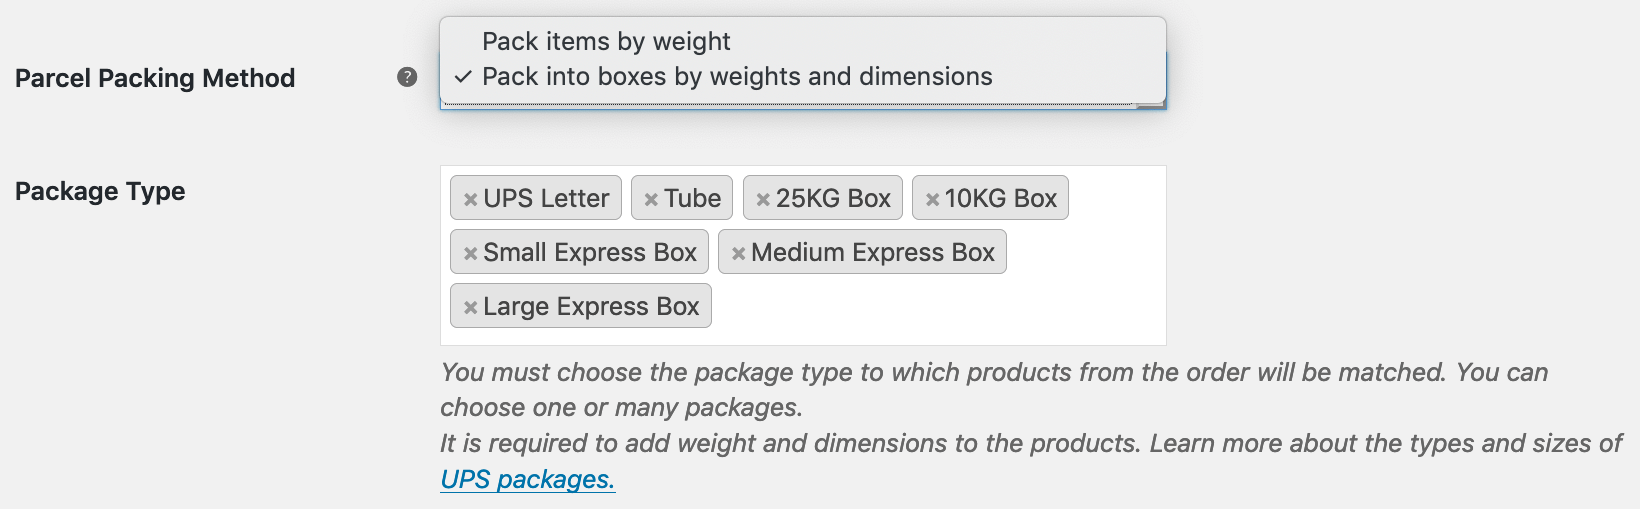 UPS Live Rates - pack into boxes by weights and dimensions